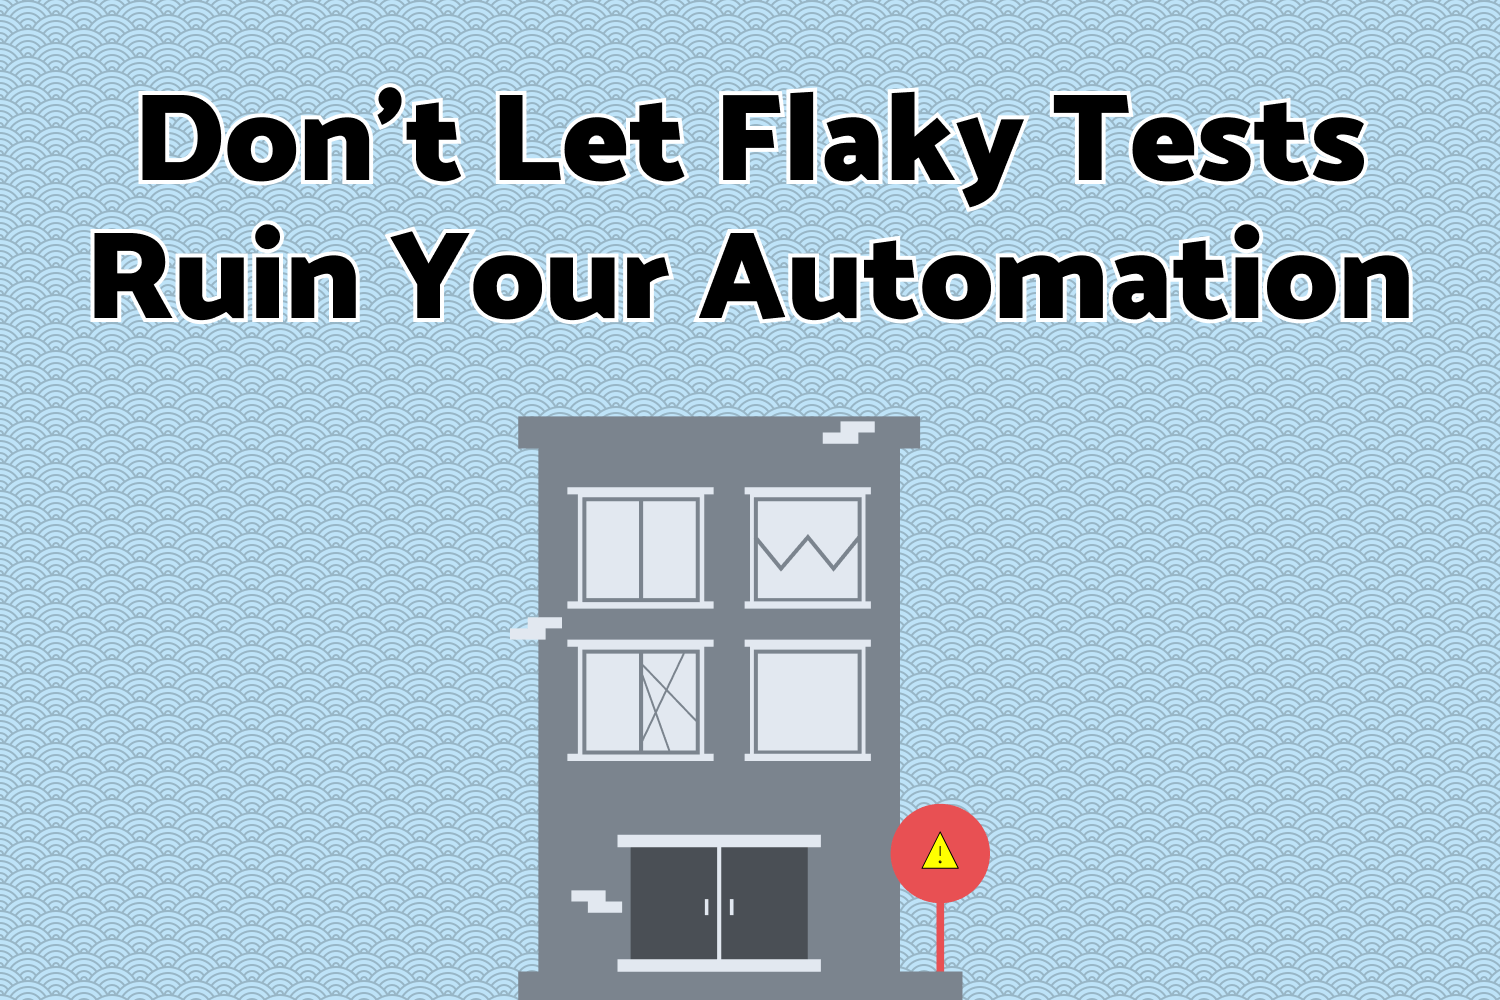 Don't Let Flaky Tests Ruin Your Automation